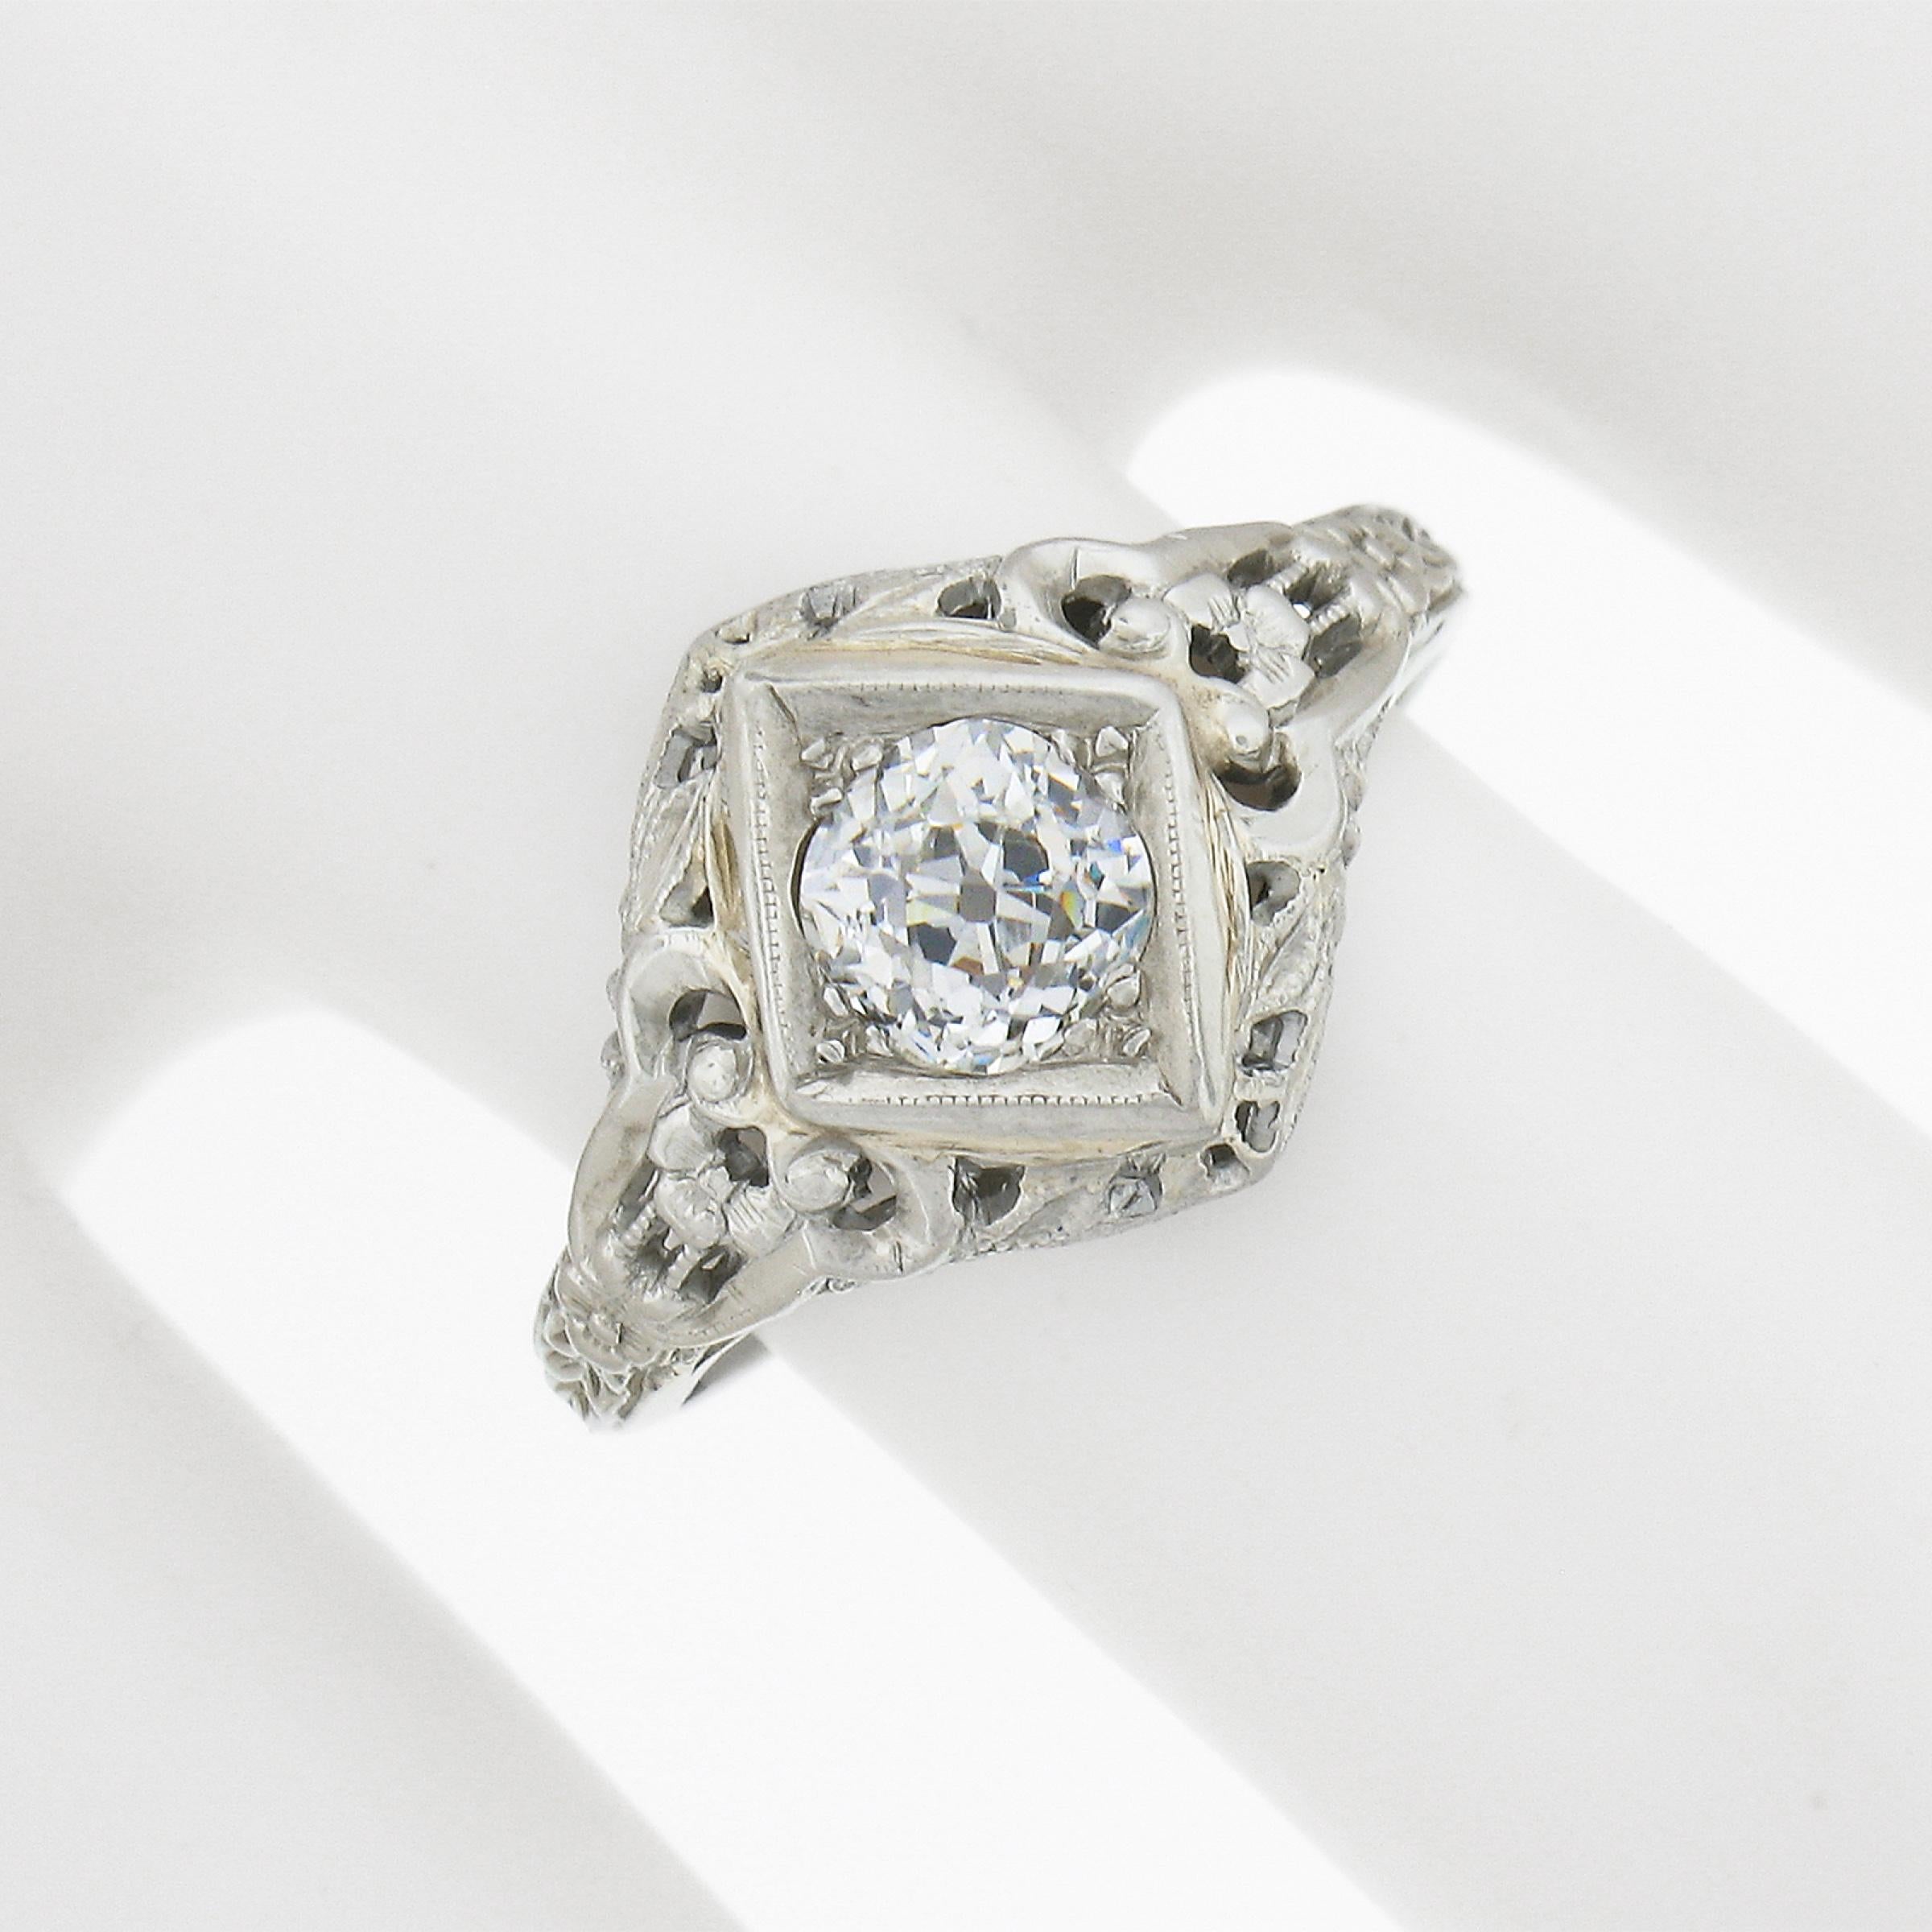 Antique 18k Gold 0.60ct Old Mine Cushion Diamond Floral Filigree Engagement Ring In Excellent Condition For Sale In Montclair, NJ